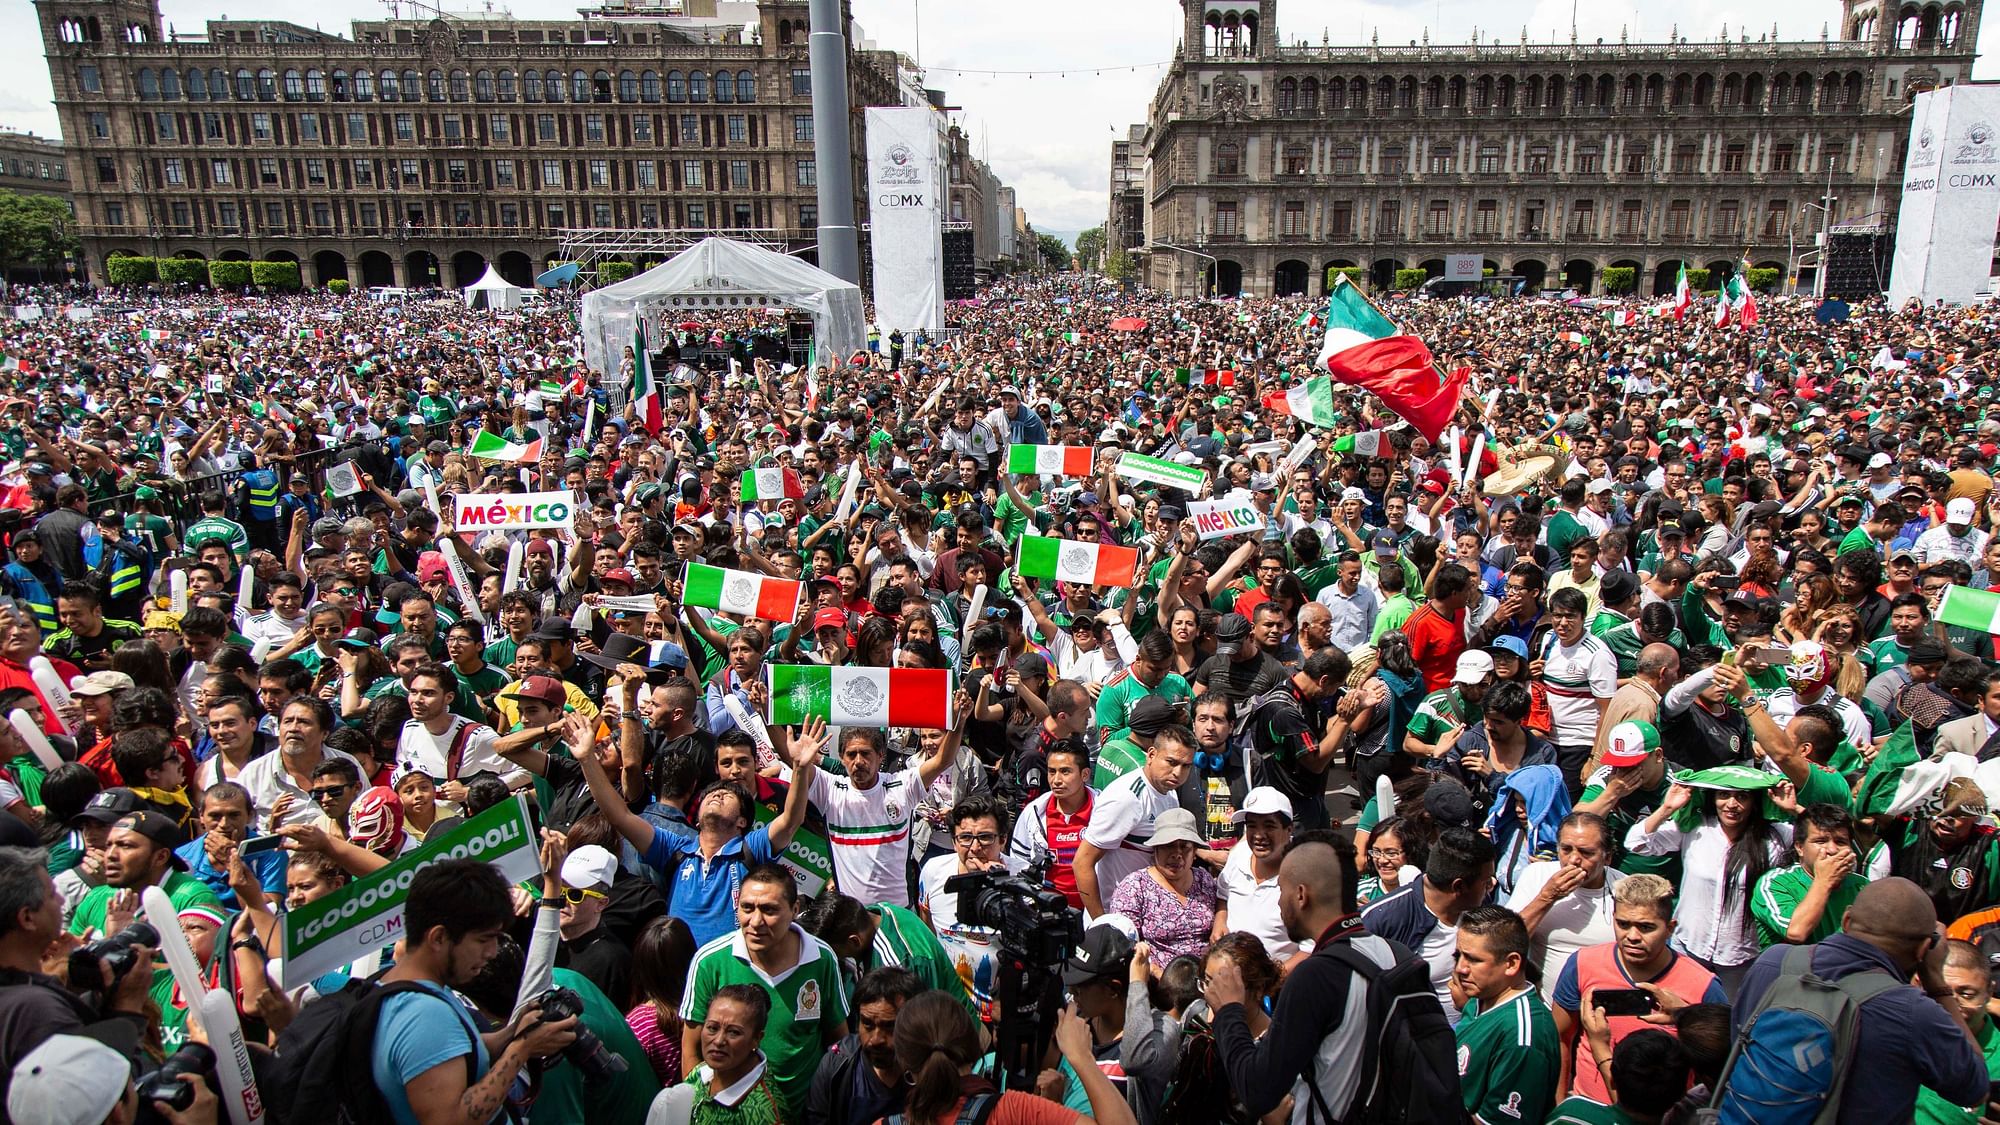 Fans celebrate Mexico’s win during the Mexico vs Germany World Cup in Mexico City, on 17  June.